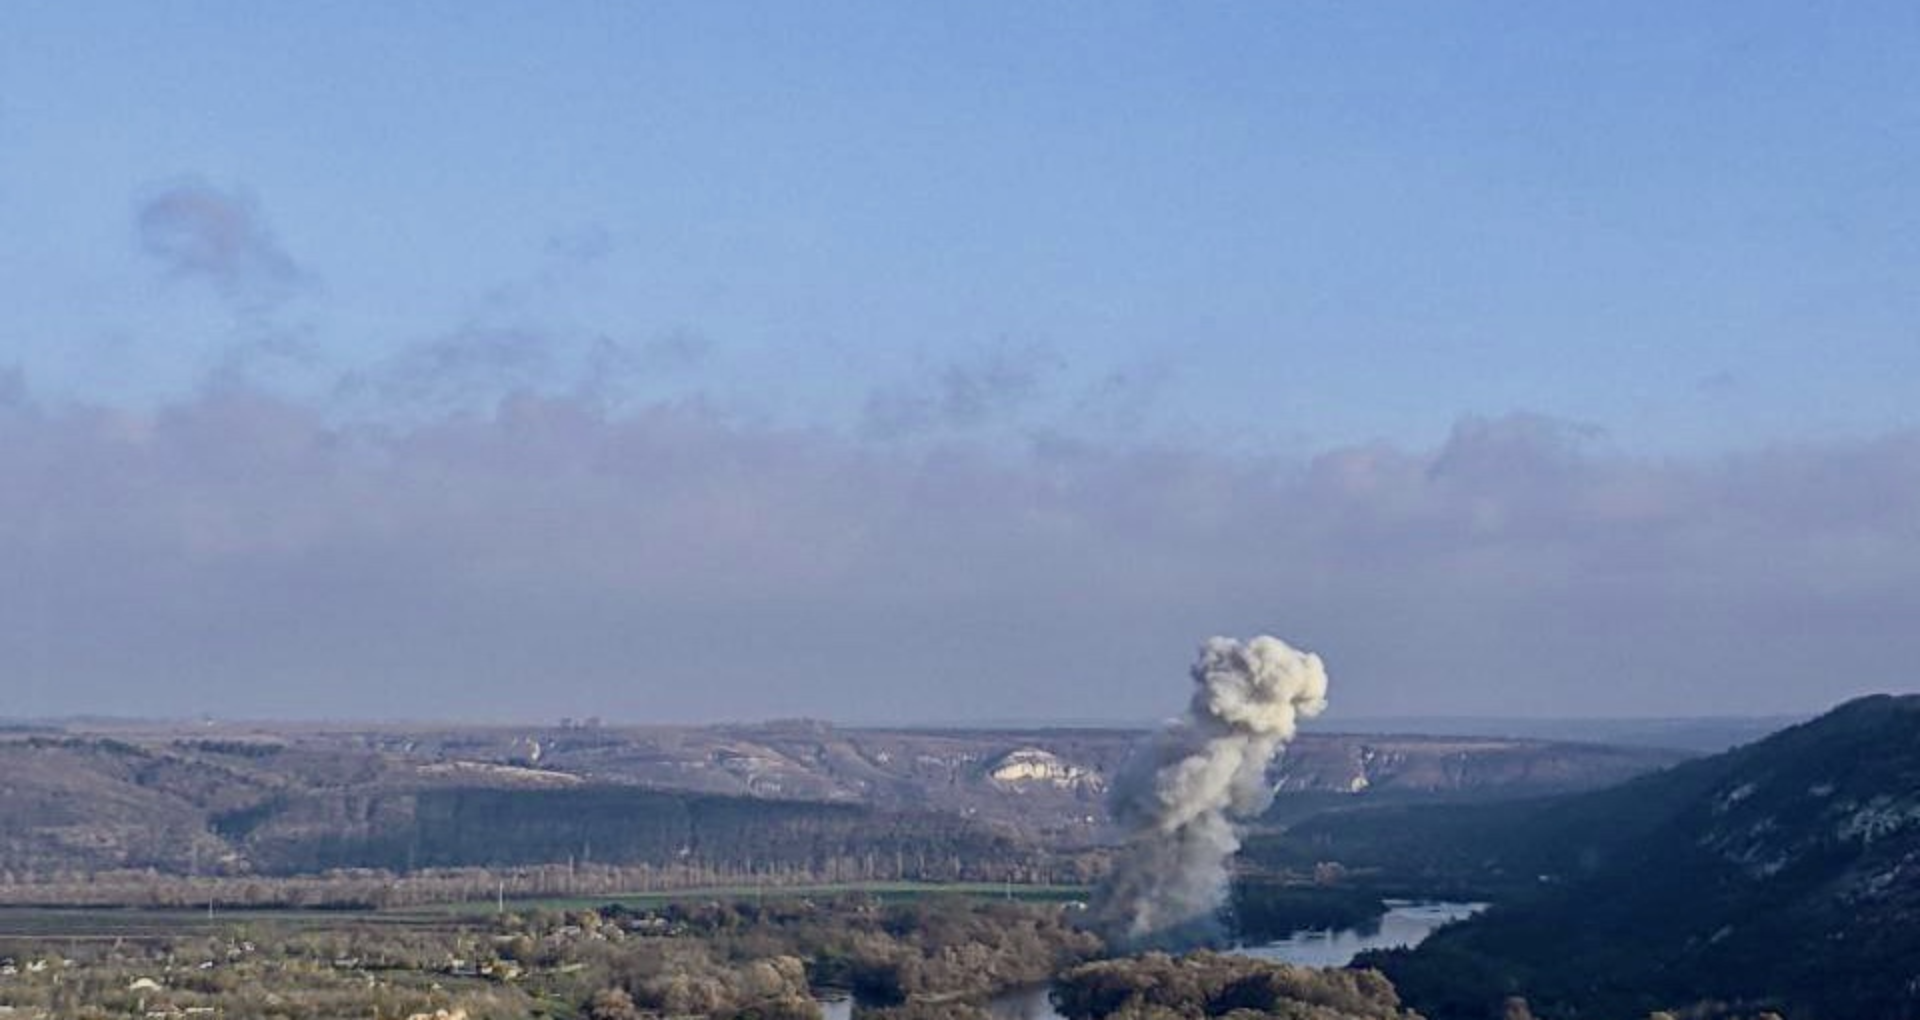 This morning, a missile shot down by the Ukrainian anti-aircraft system fell near the village of Naslavcea in Moldova, the Interior Ministry announces